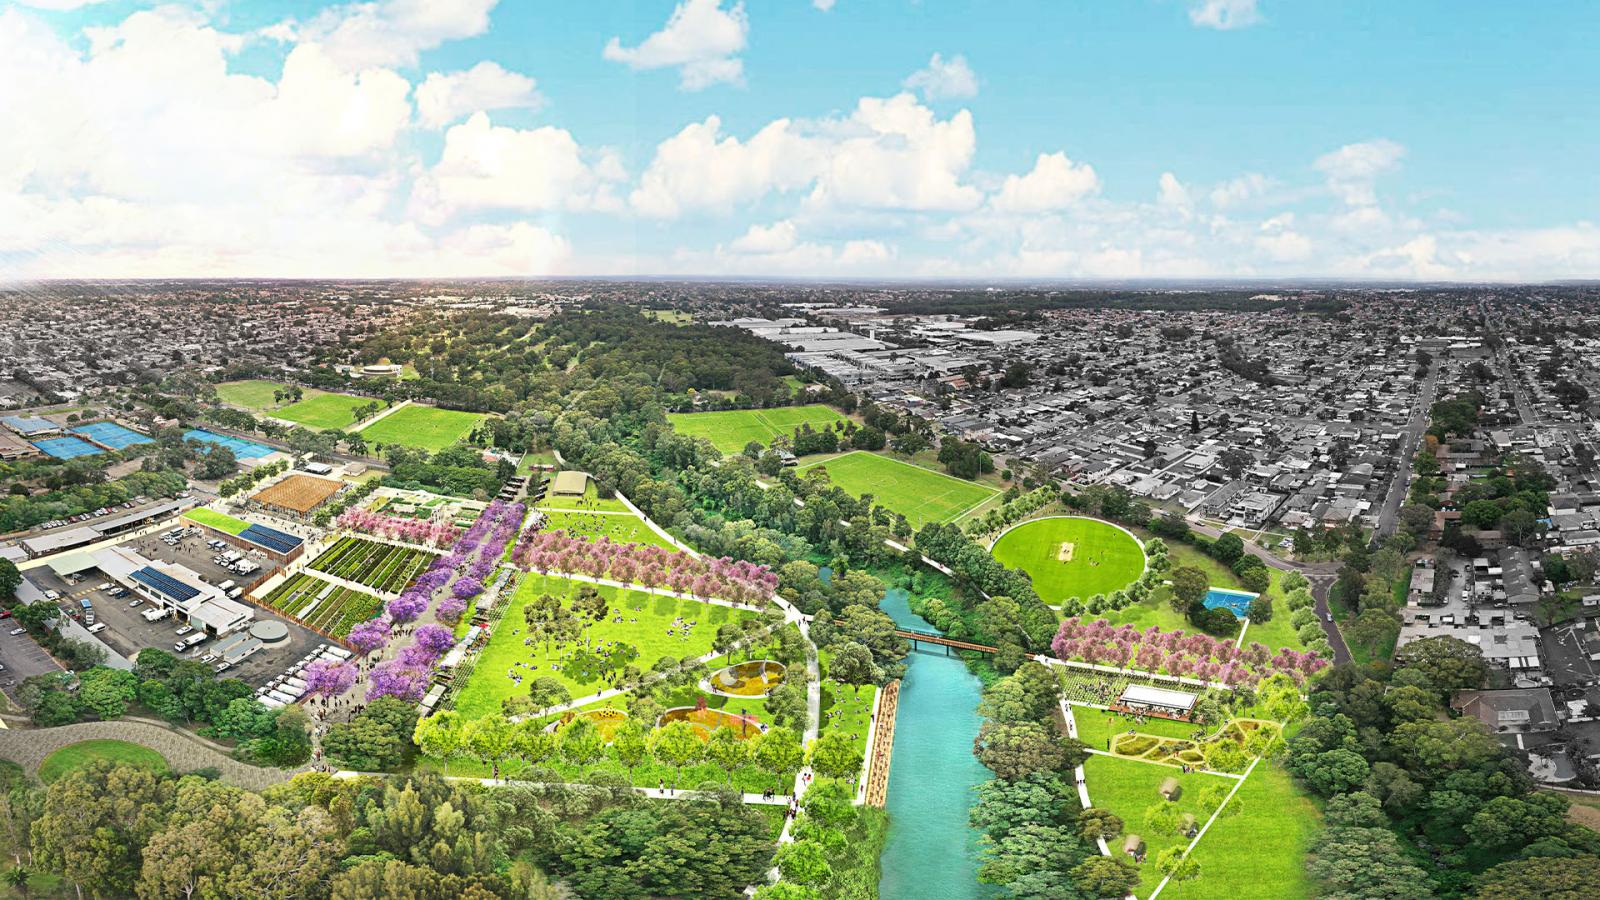 Aerial view of a vibrant urban park with green spaces, sports fields, pathways, and clusters of trees and flowers along the scenic Duck River. The park, part of an extensive masterplan, is bordered by residential neighborhoods on one side and industrial buildings on the other under a partly cloudy sky.